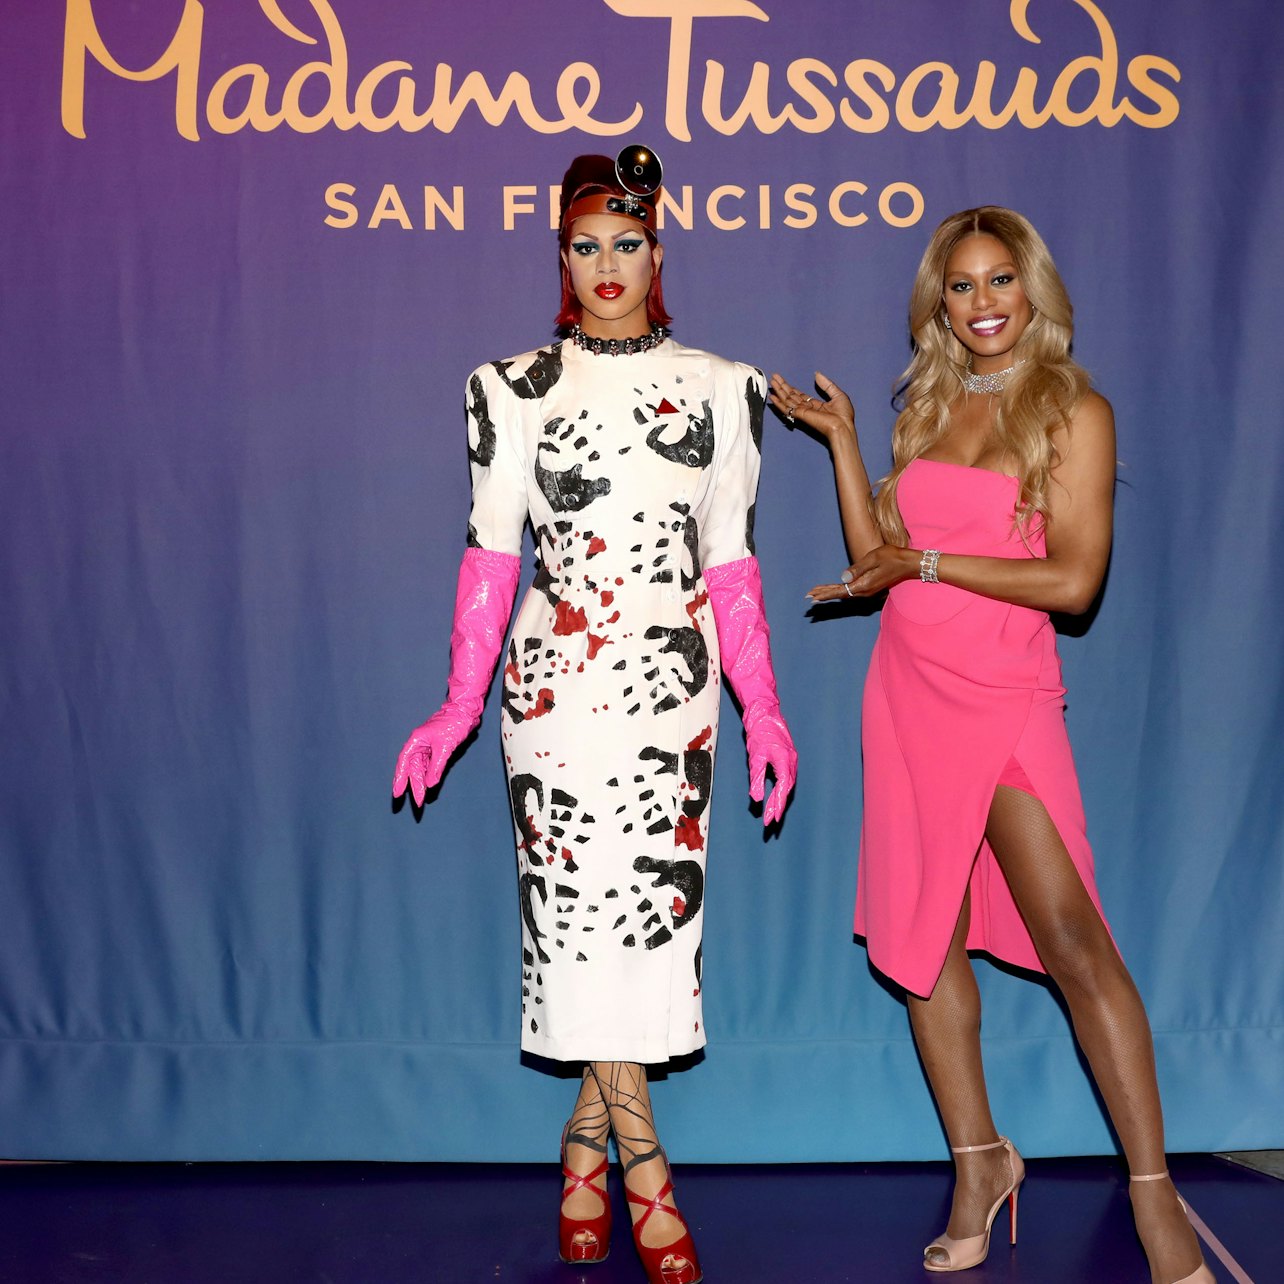 Madame Tussauds San Francisco - Accommodations in San Francisco